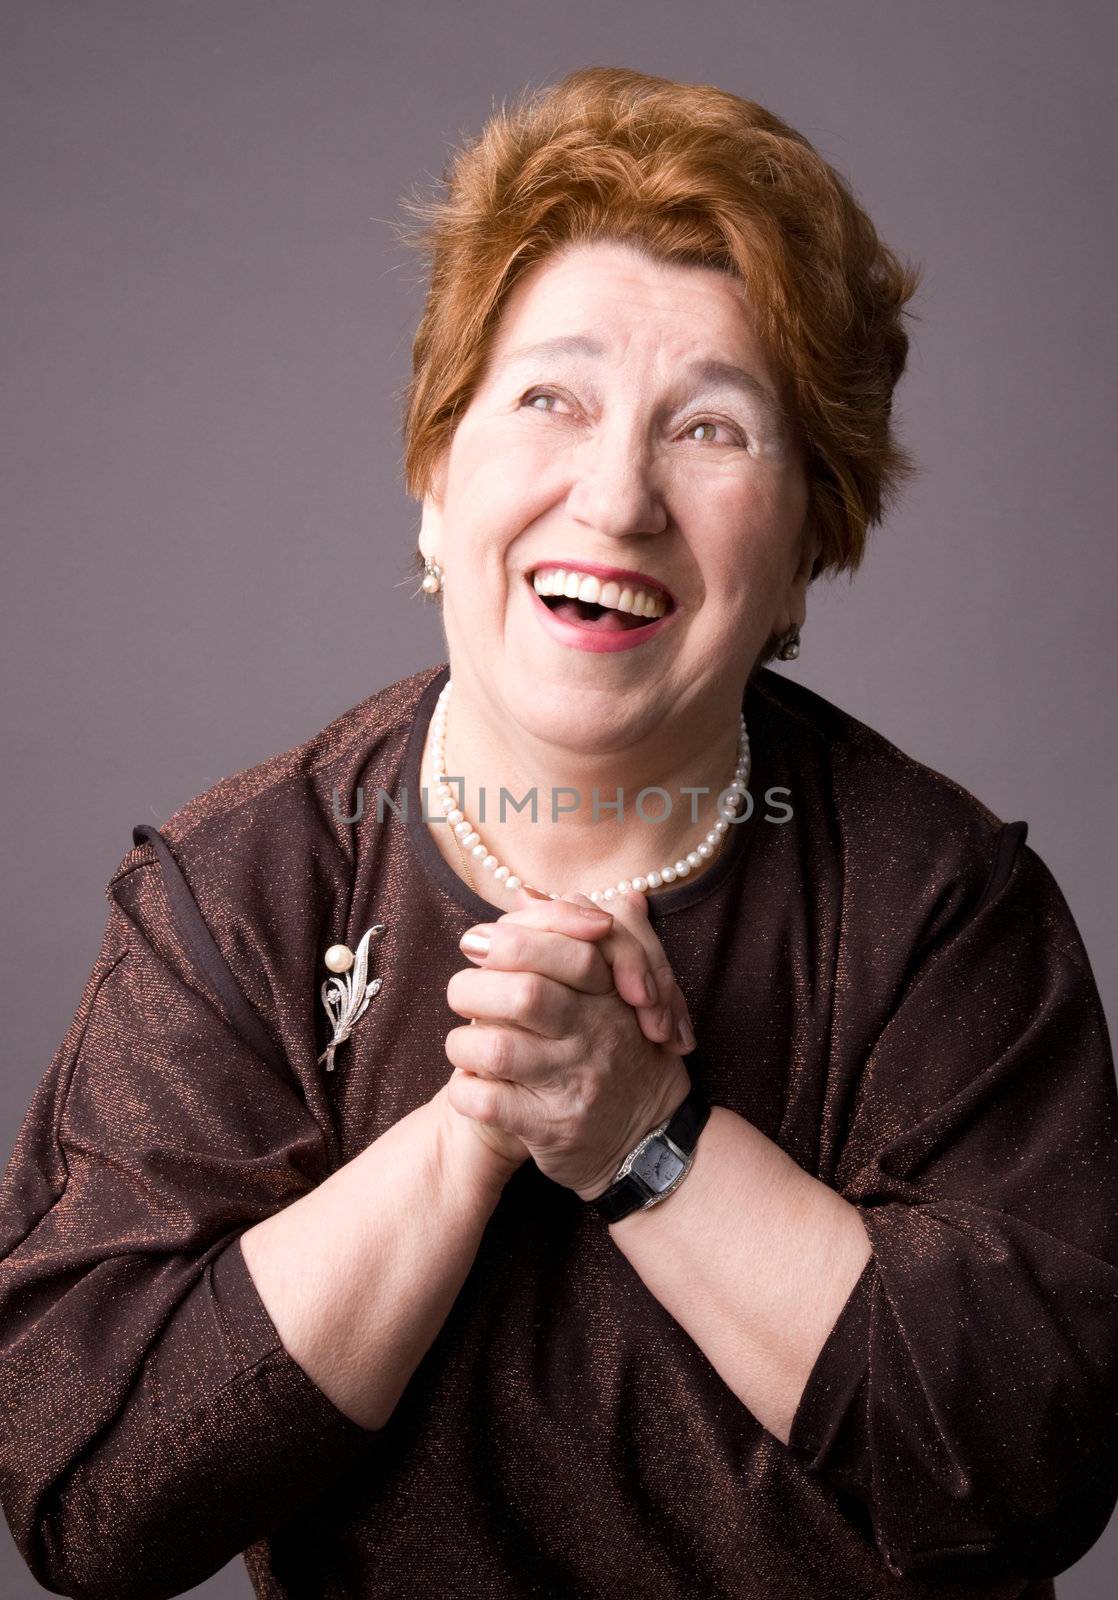 The cheerful elderly woman in a brown dress on a grey background.